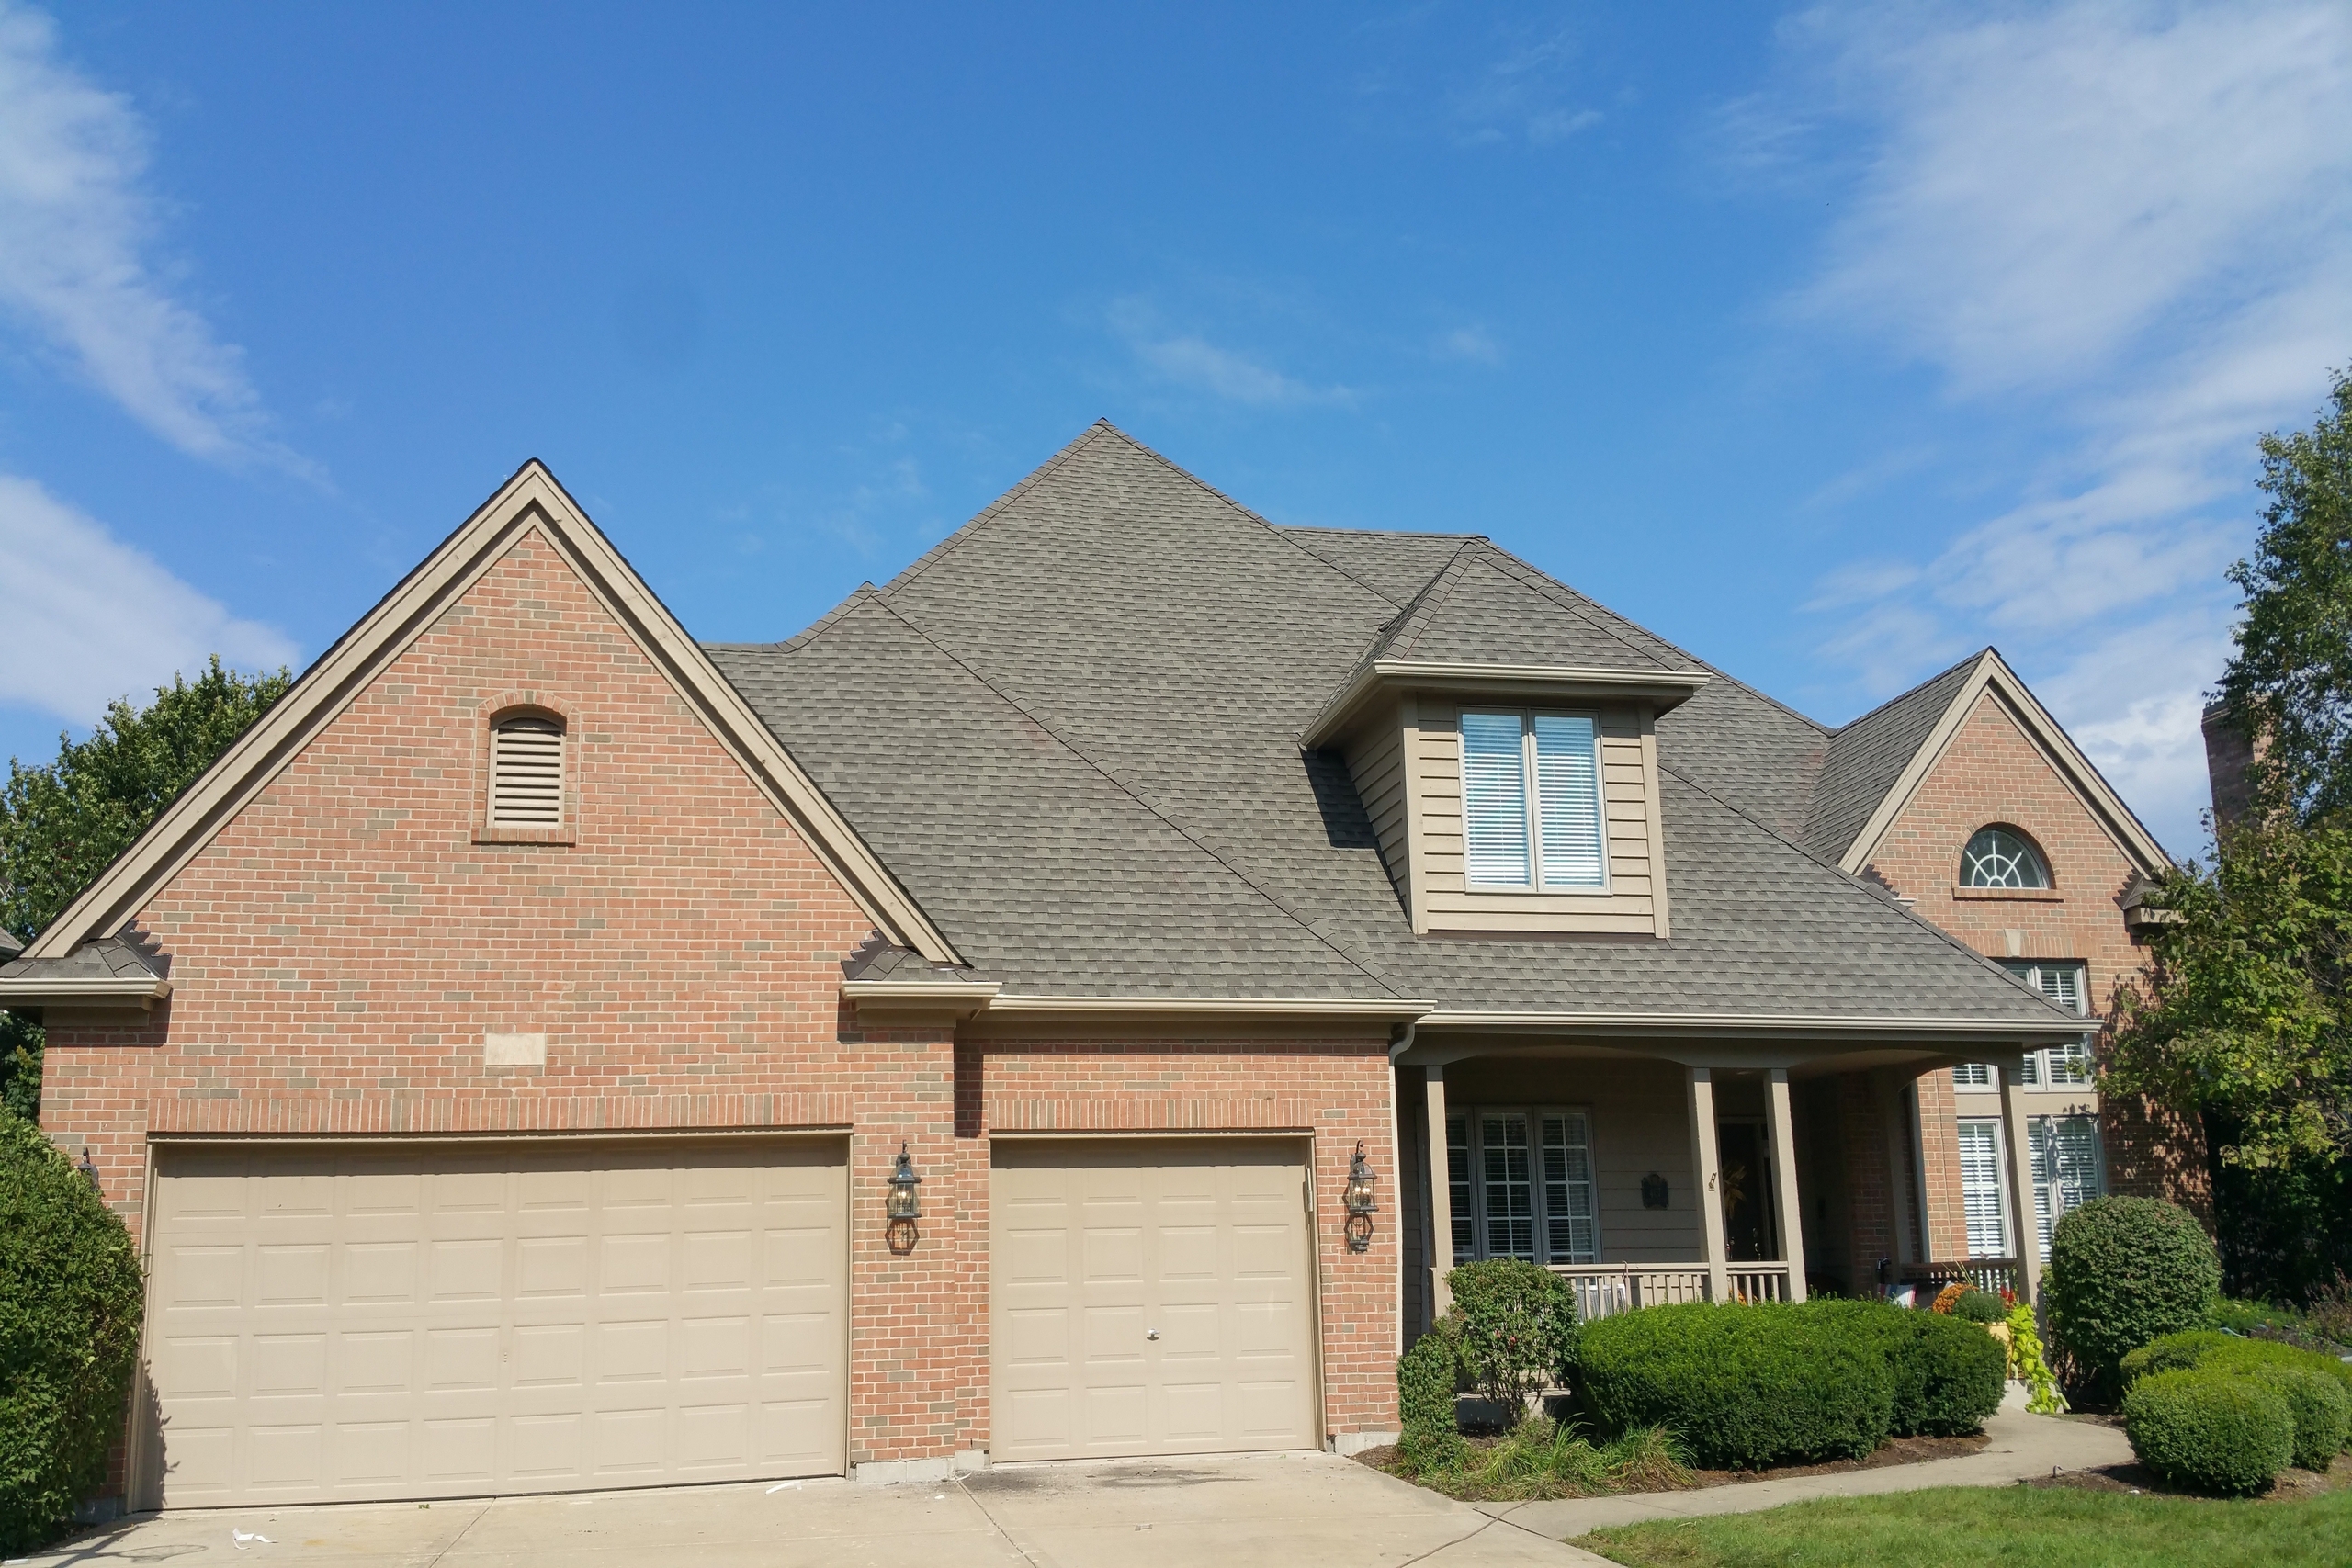 Naperville Il Smart Roofing Contractor Repair Installation Storm Hail Damage